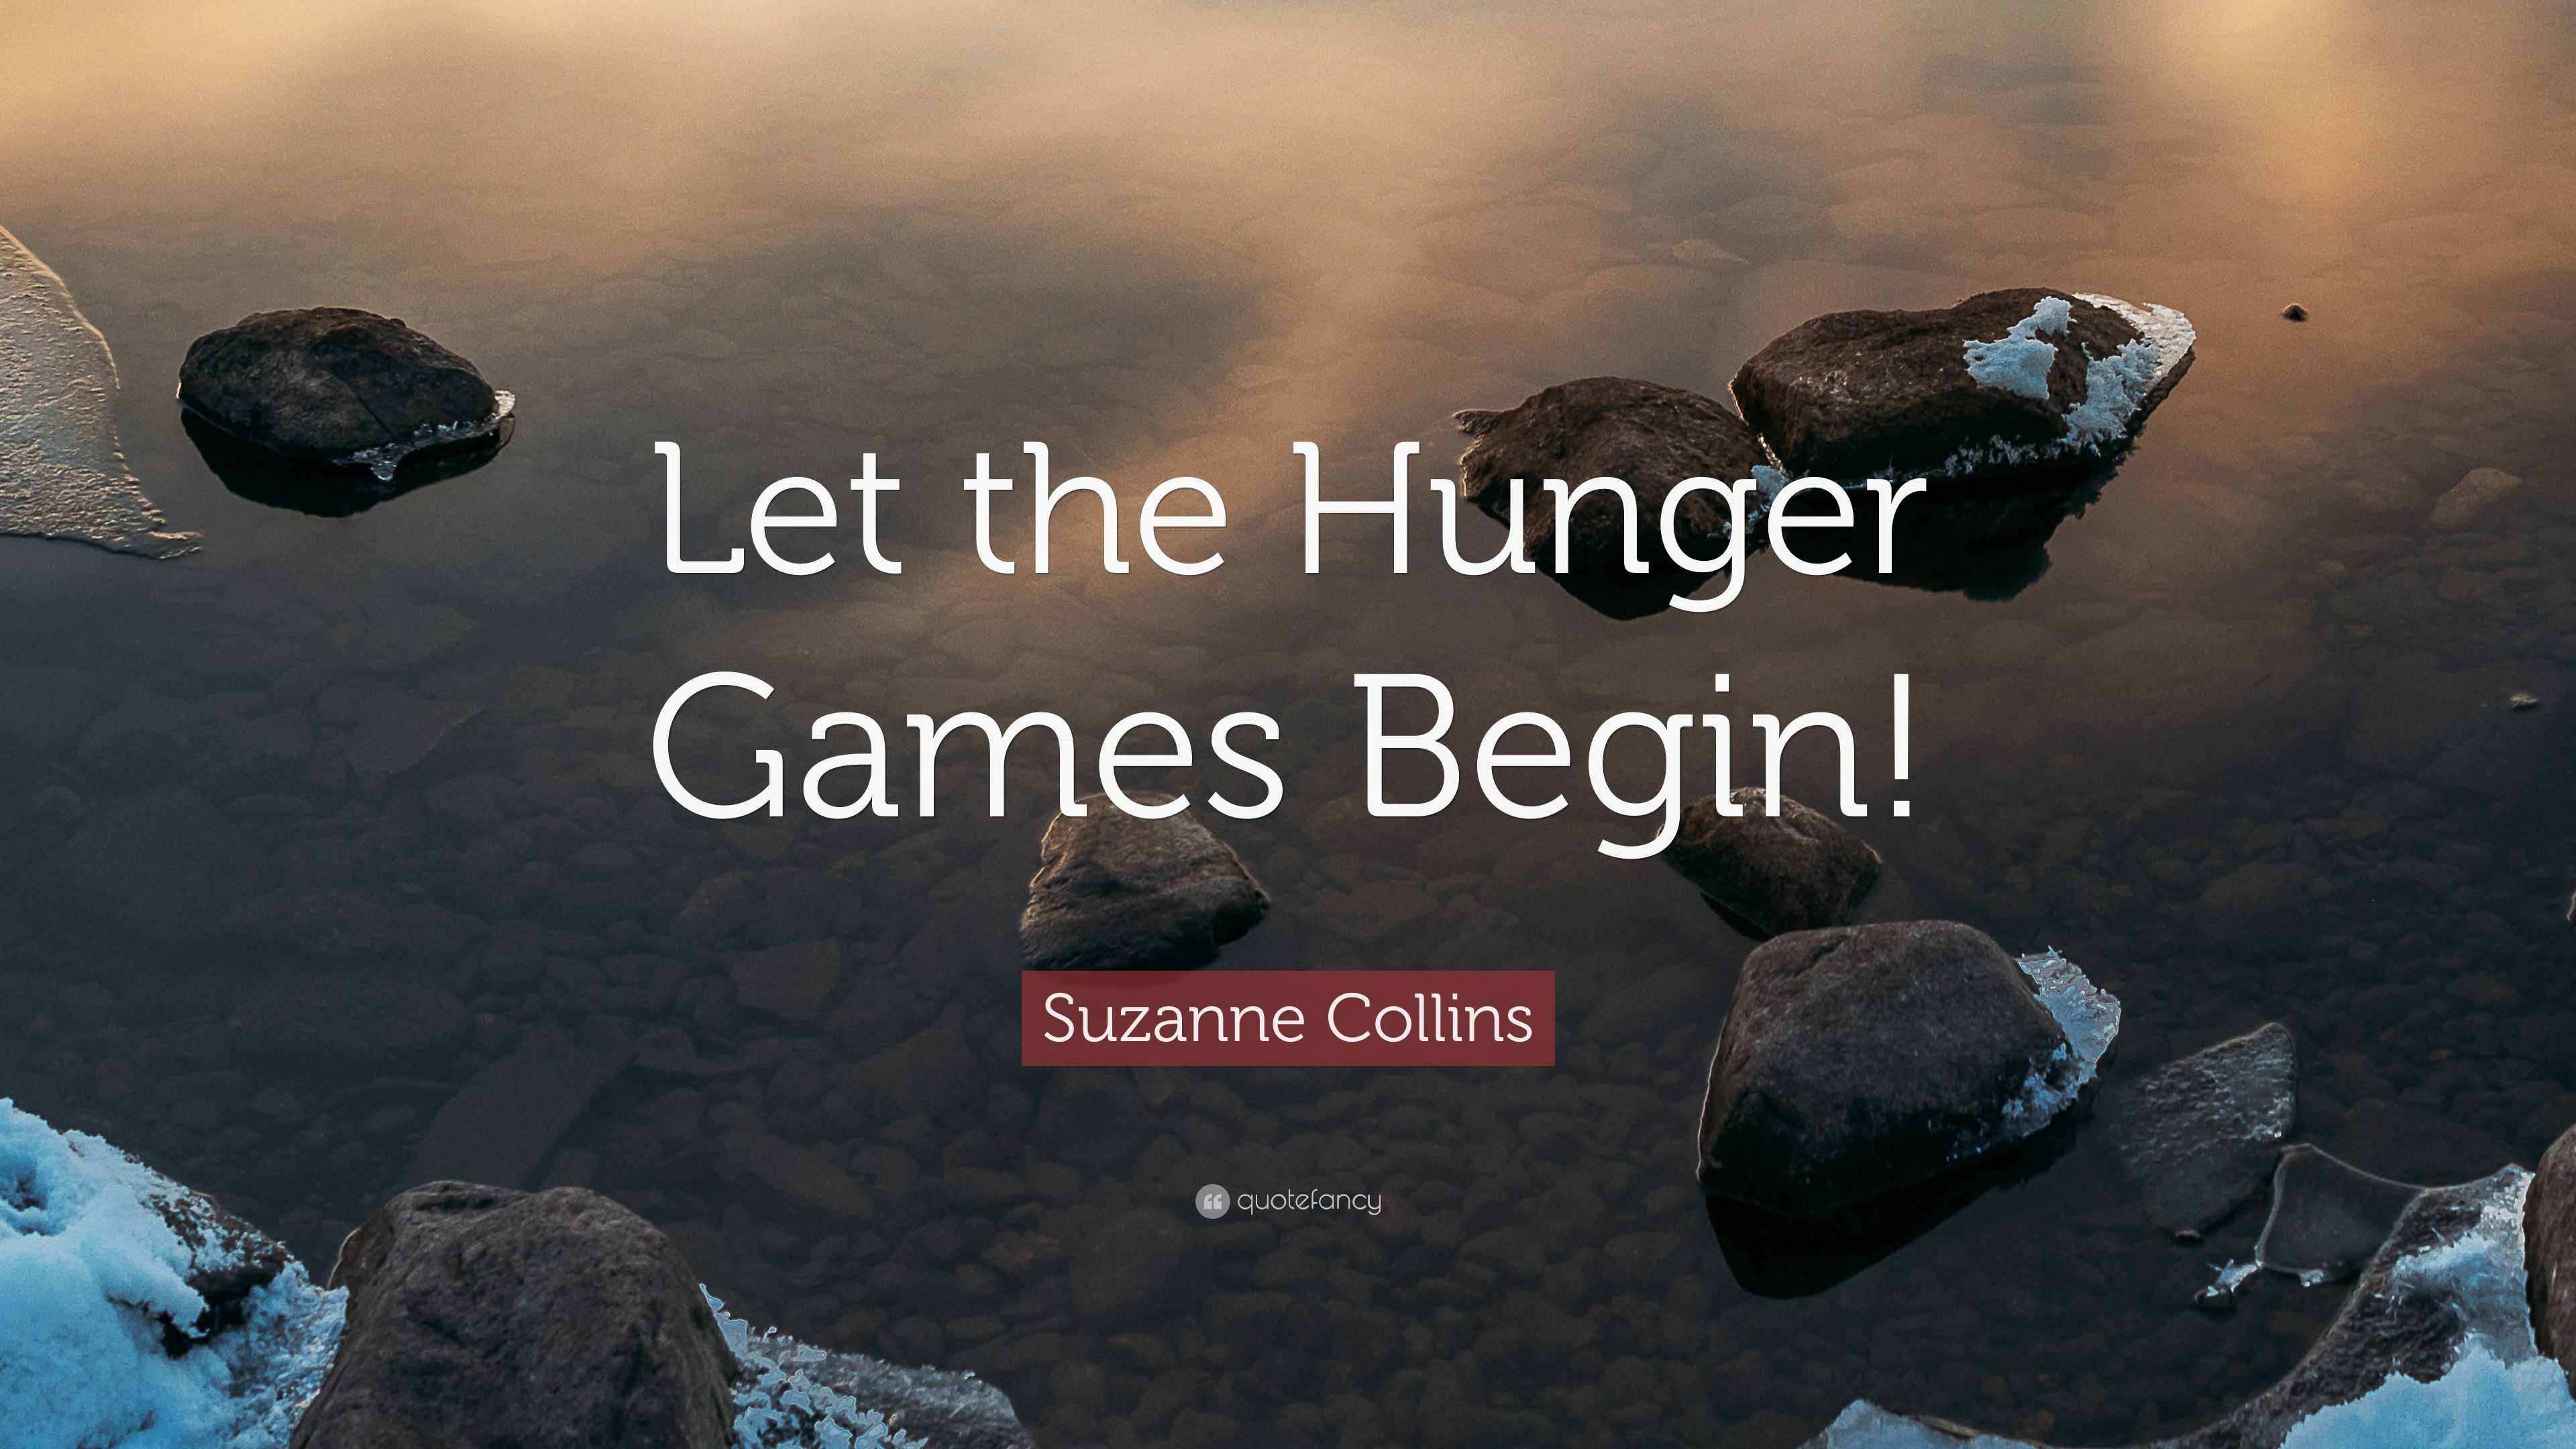 Suzanne Collins Quote: “Let the Hunger Games Begin!”